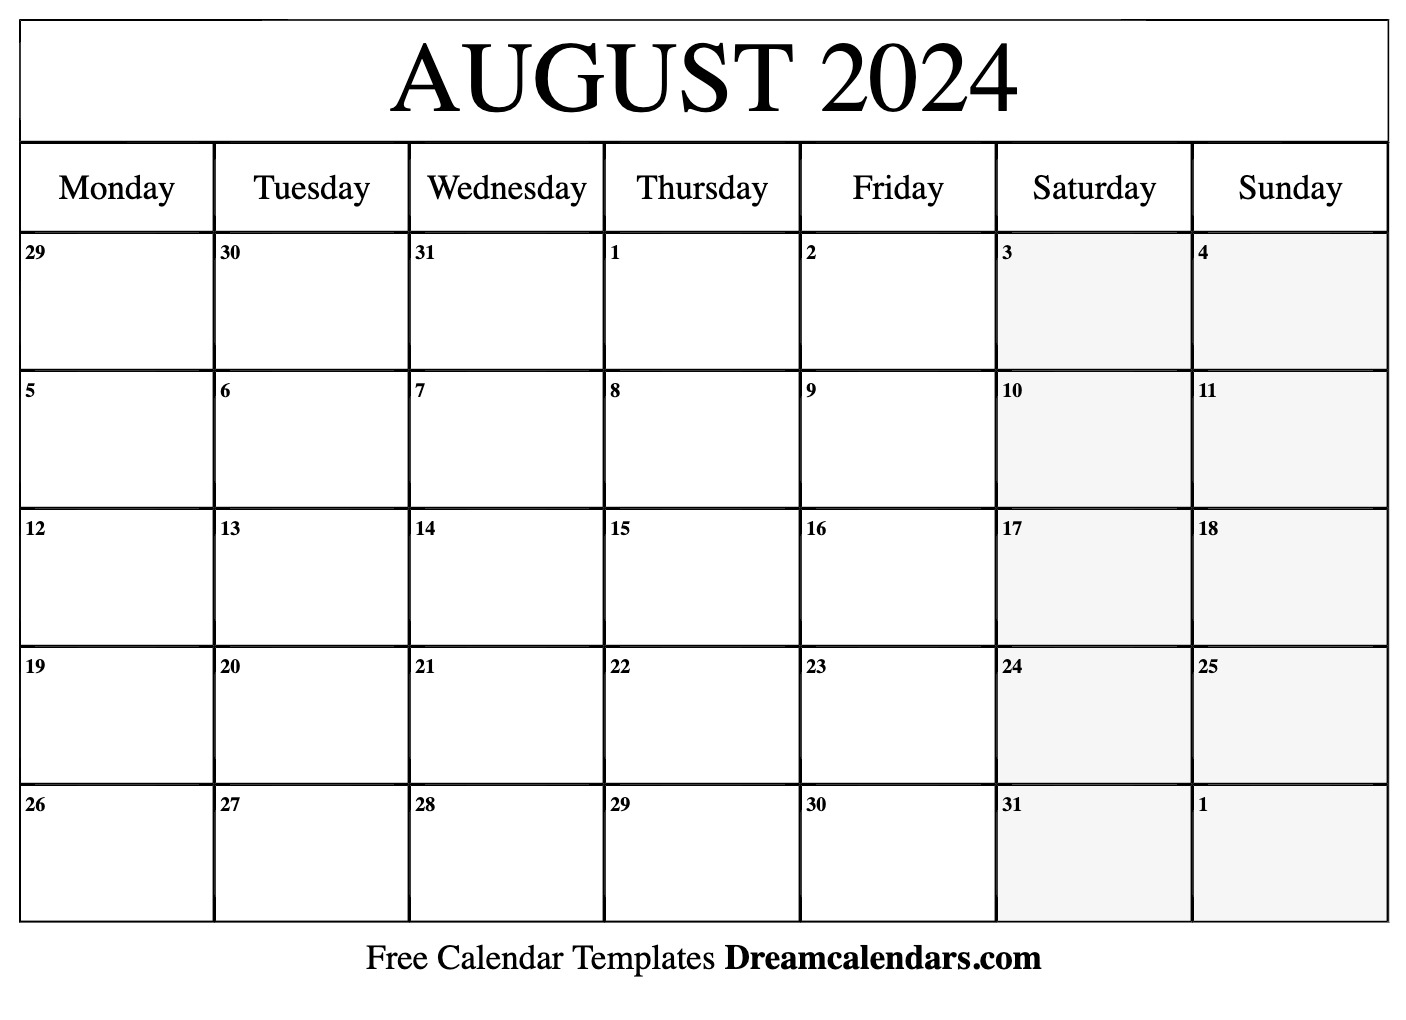 August 2024 Calendar | Free Blank Printable With Holidays for 2024 Printable Calendar August